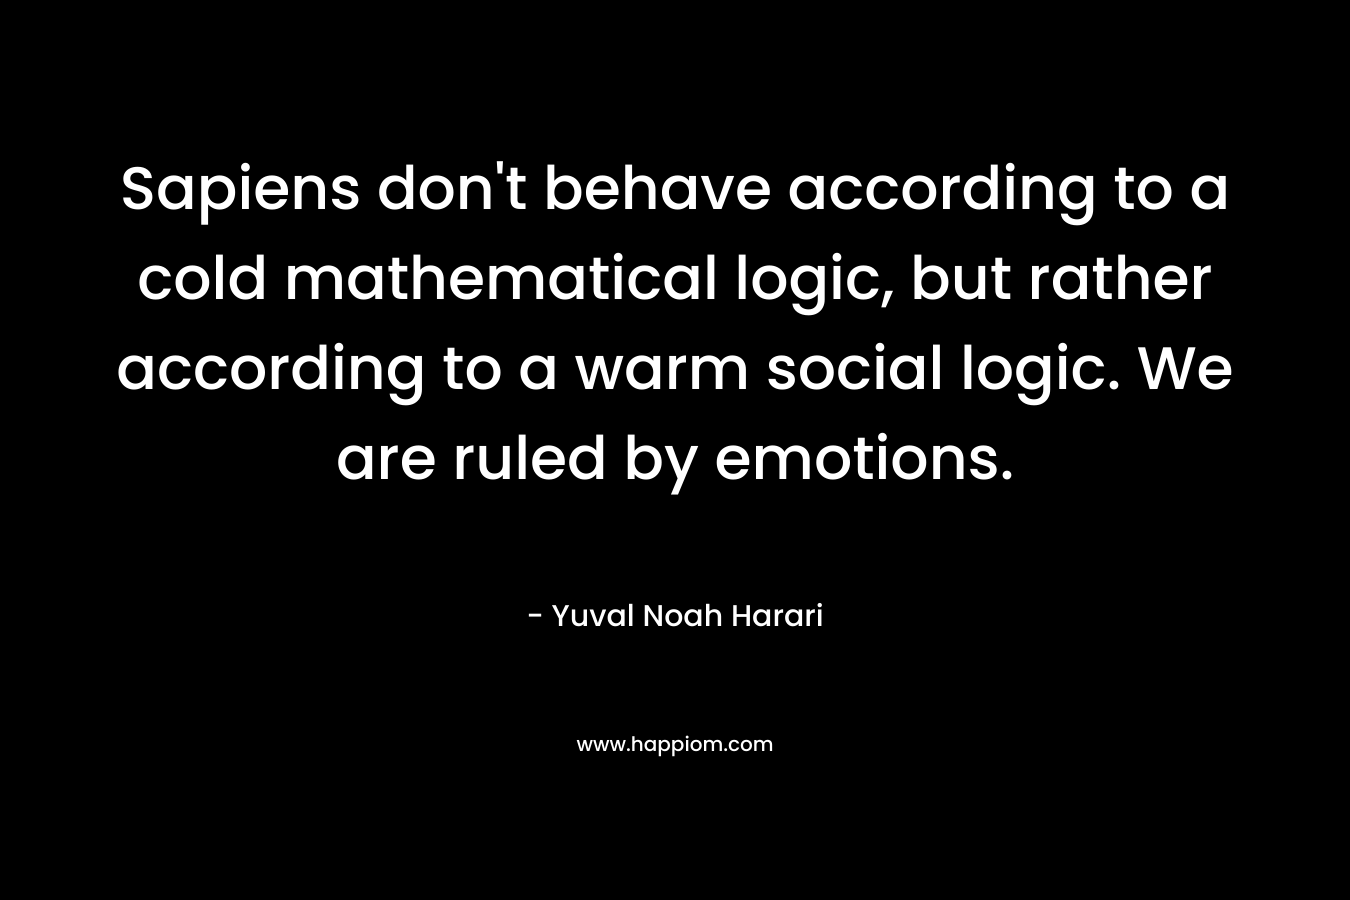 Sapiens don’t behave according to a cold mathematical logic, but rather according to a warm social logic. We are ruled by emotions. – Yuval Noah Harari